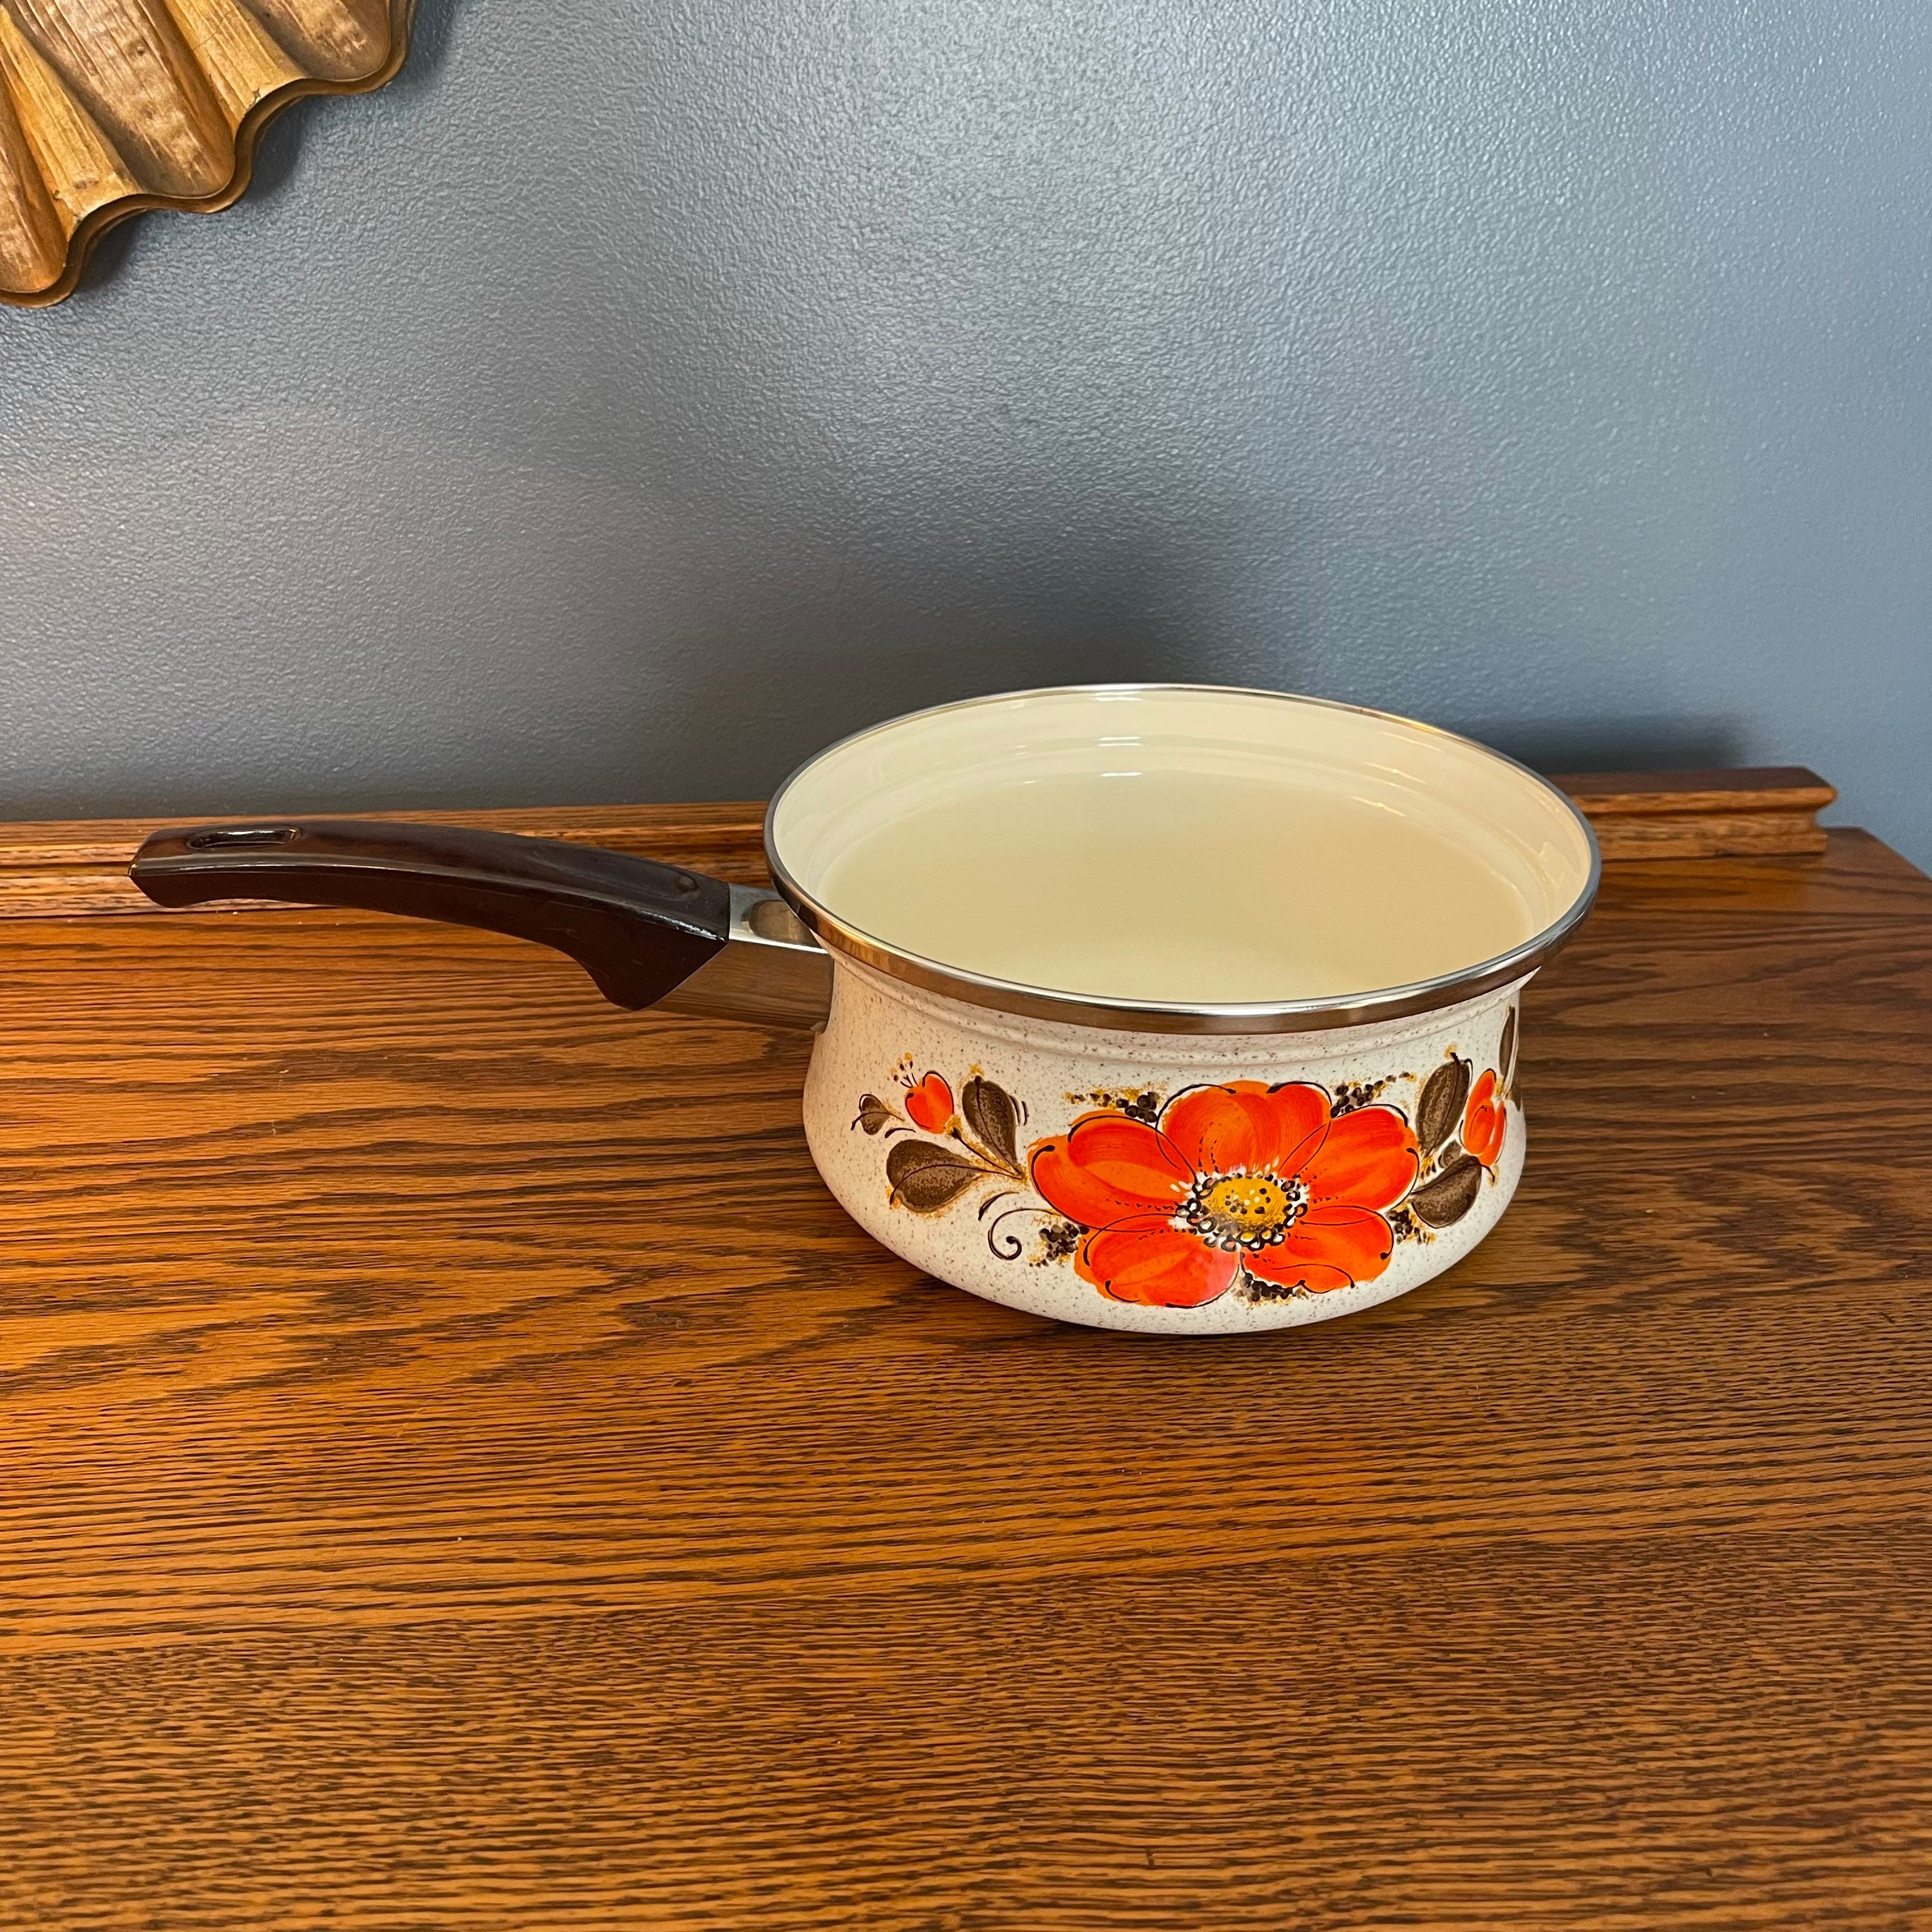 Sanko Enameled Vintage Cookware From Japan Show Pans Mid Century